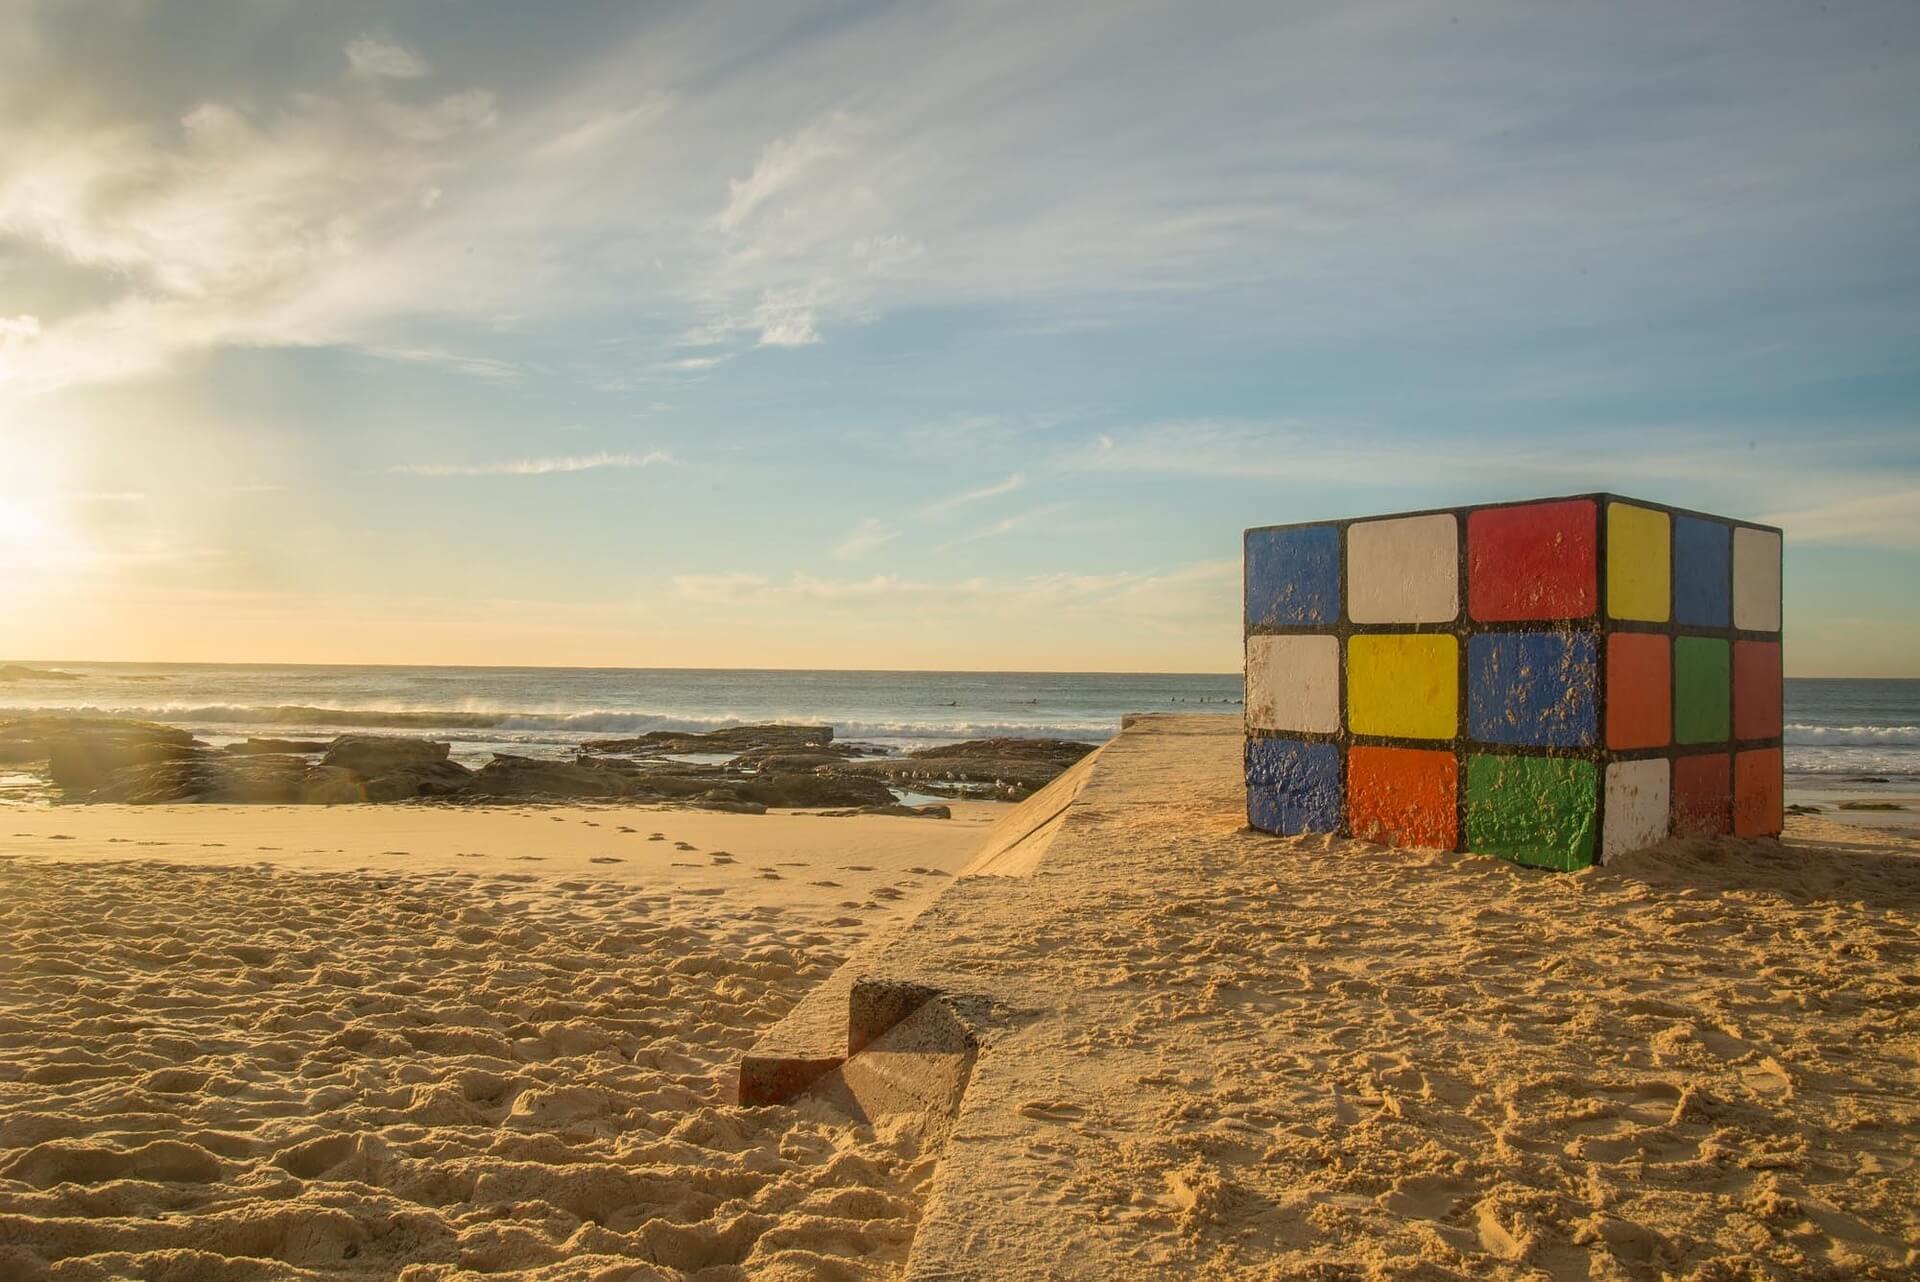 Why I’ll Never Solve the Rubik’s Cube